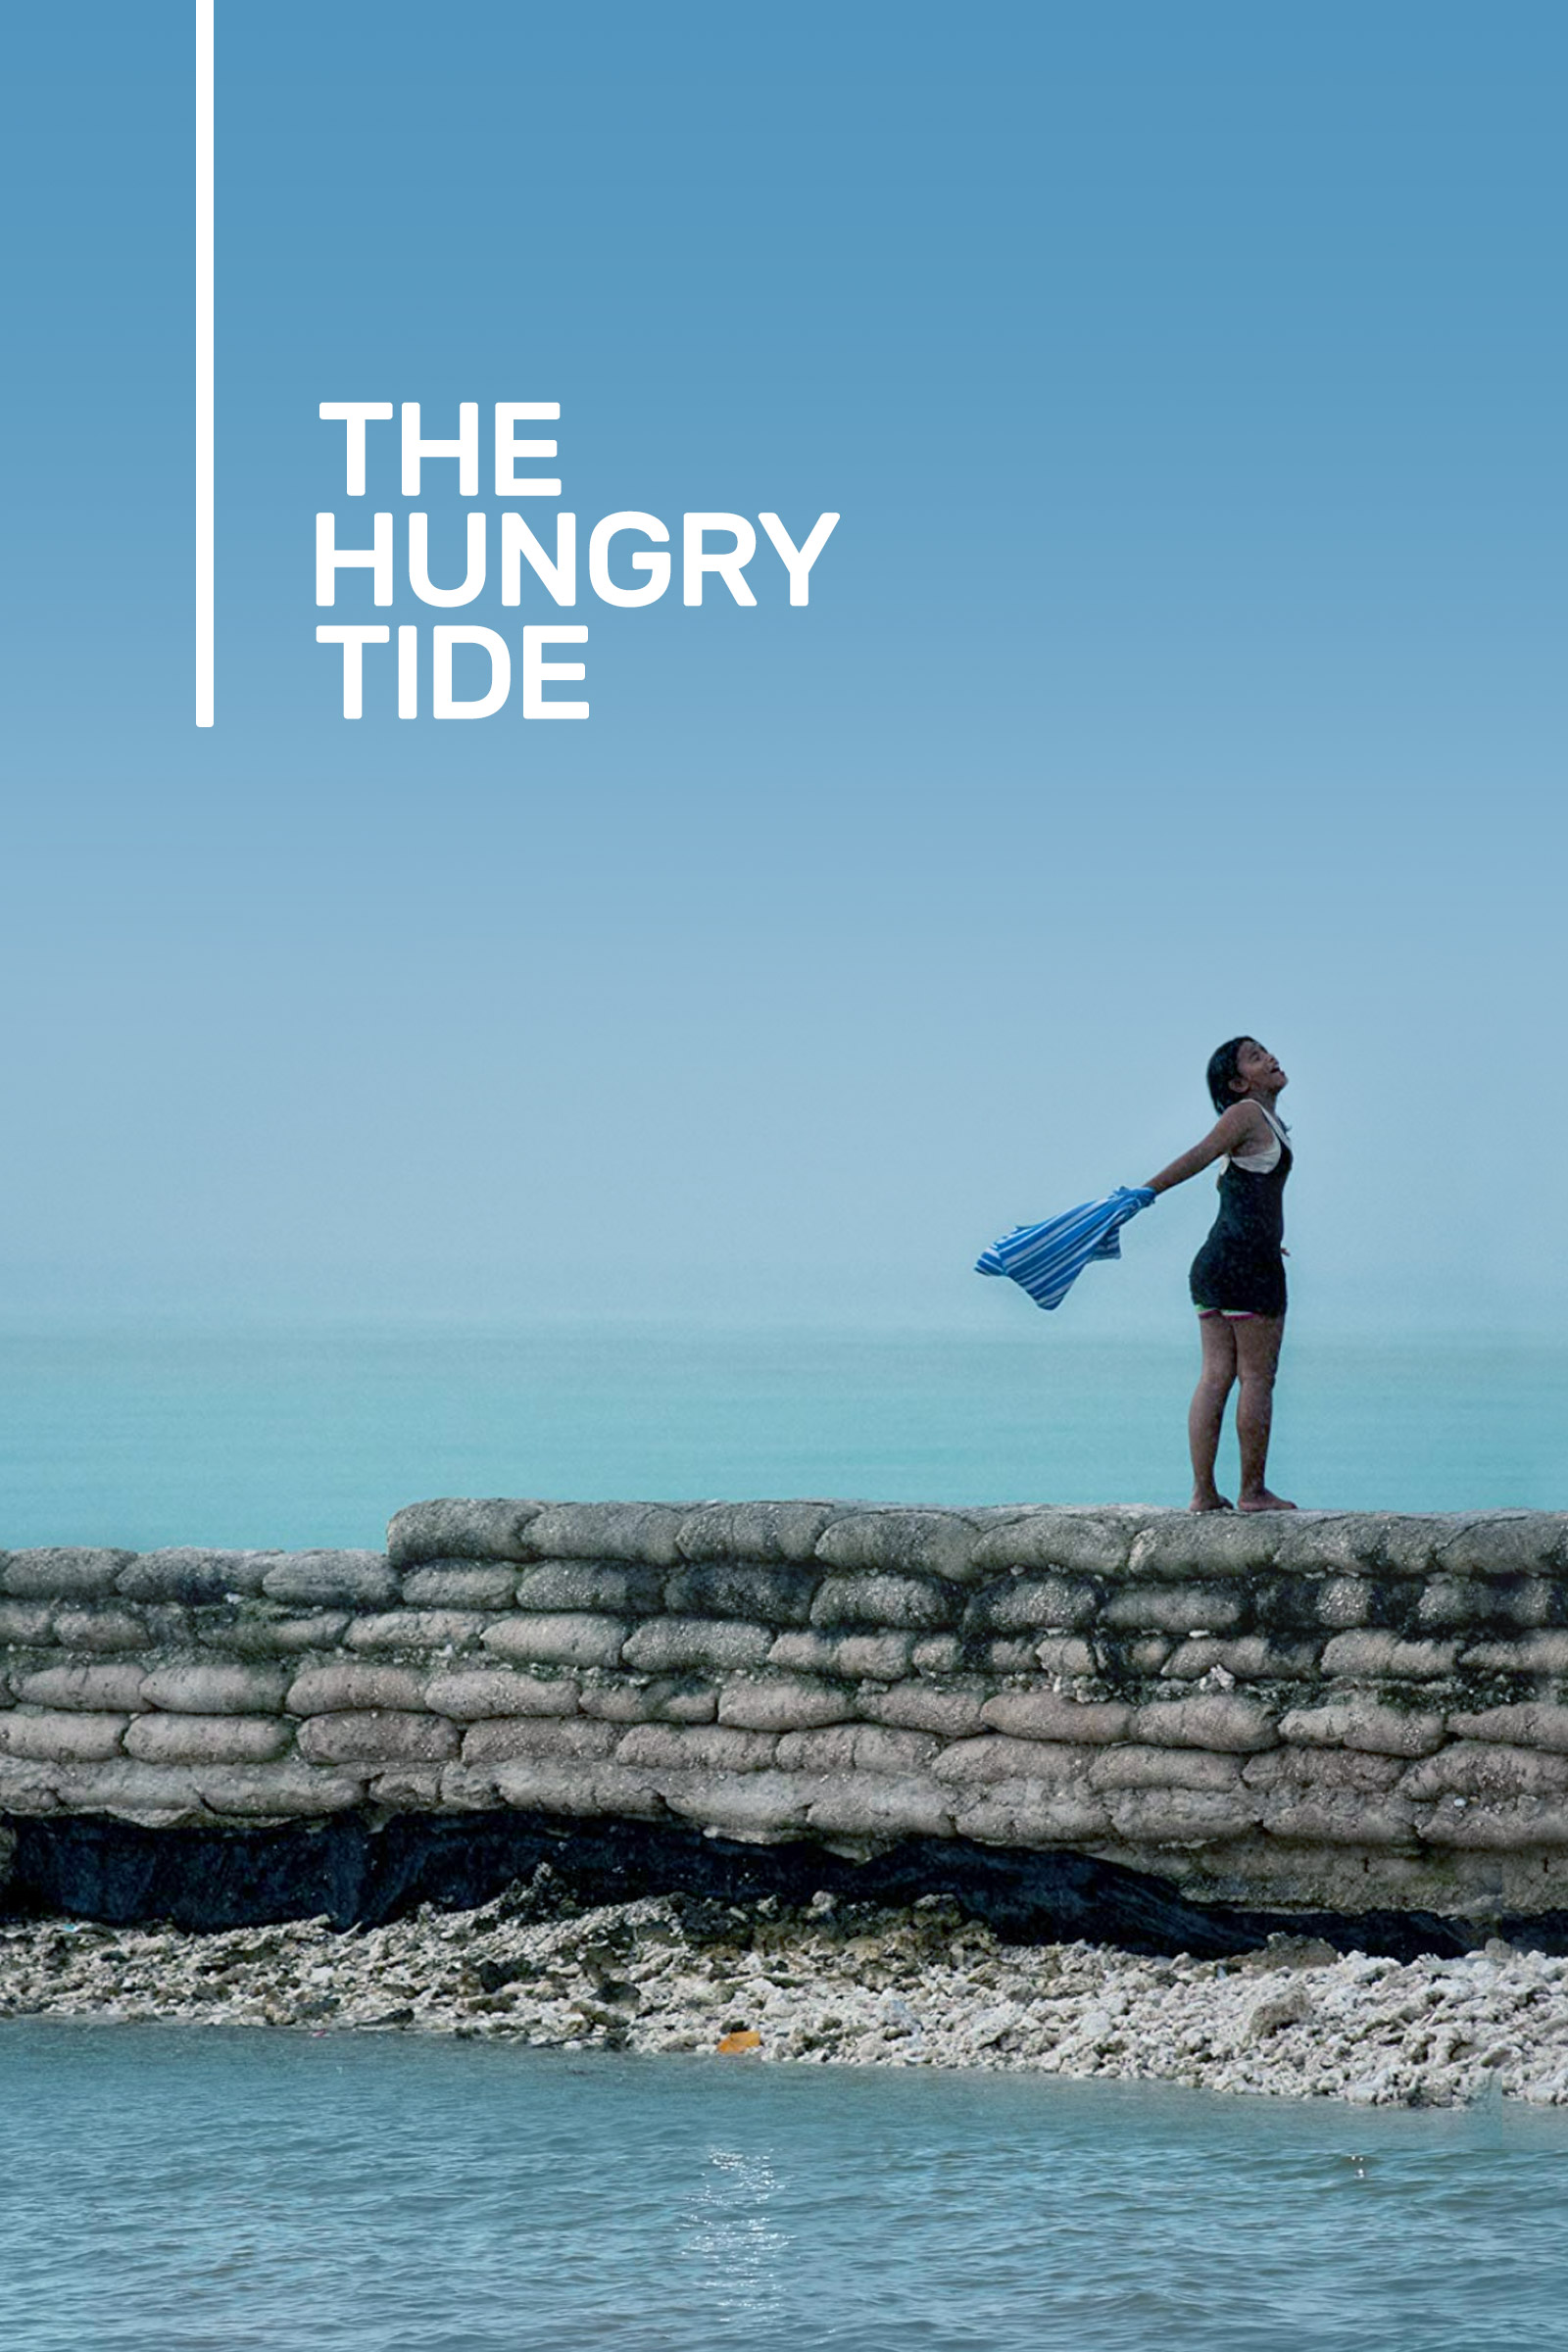 Where to stream The Hungry Tide